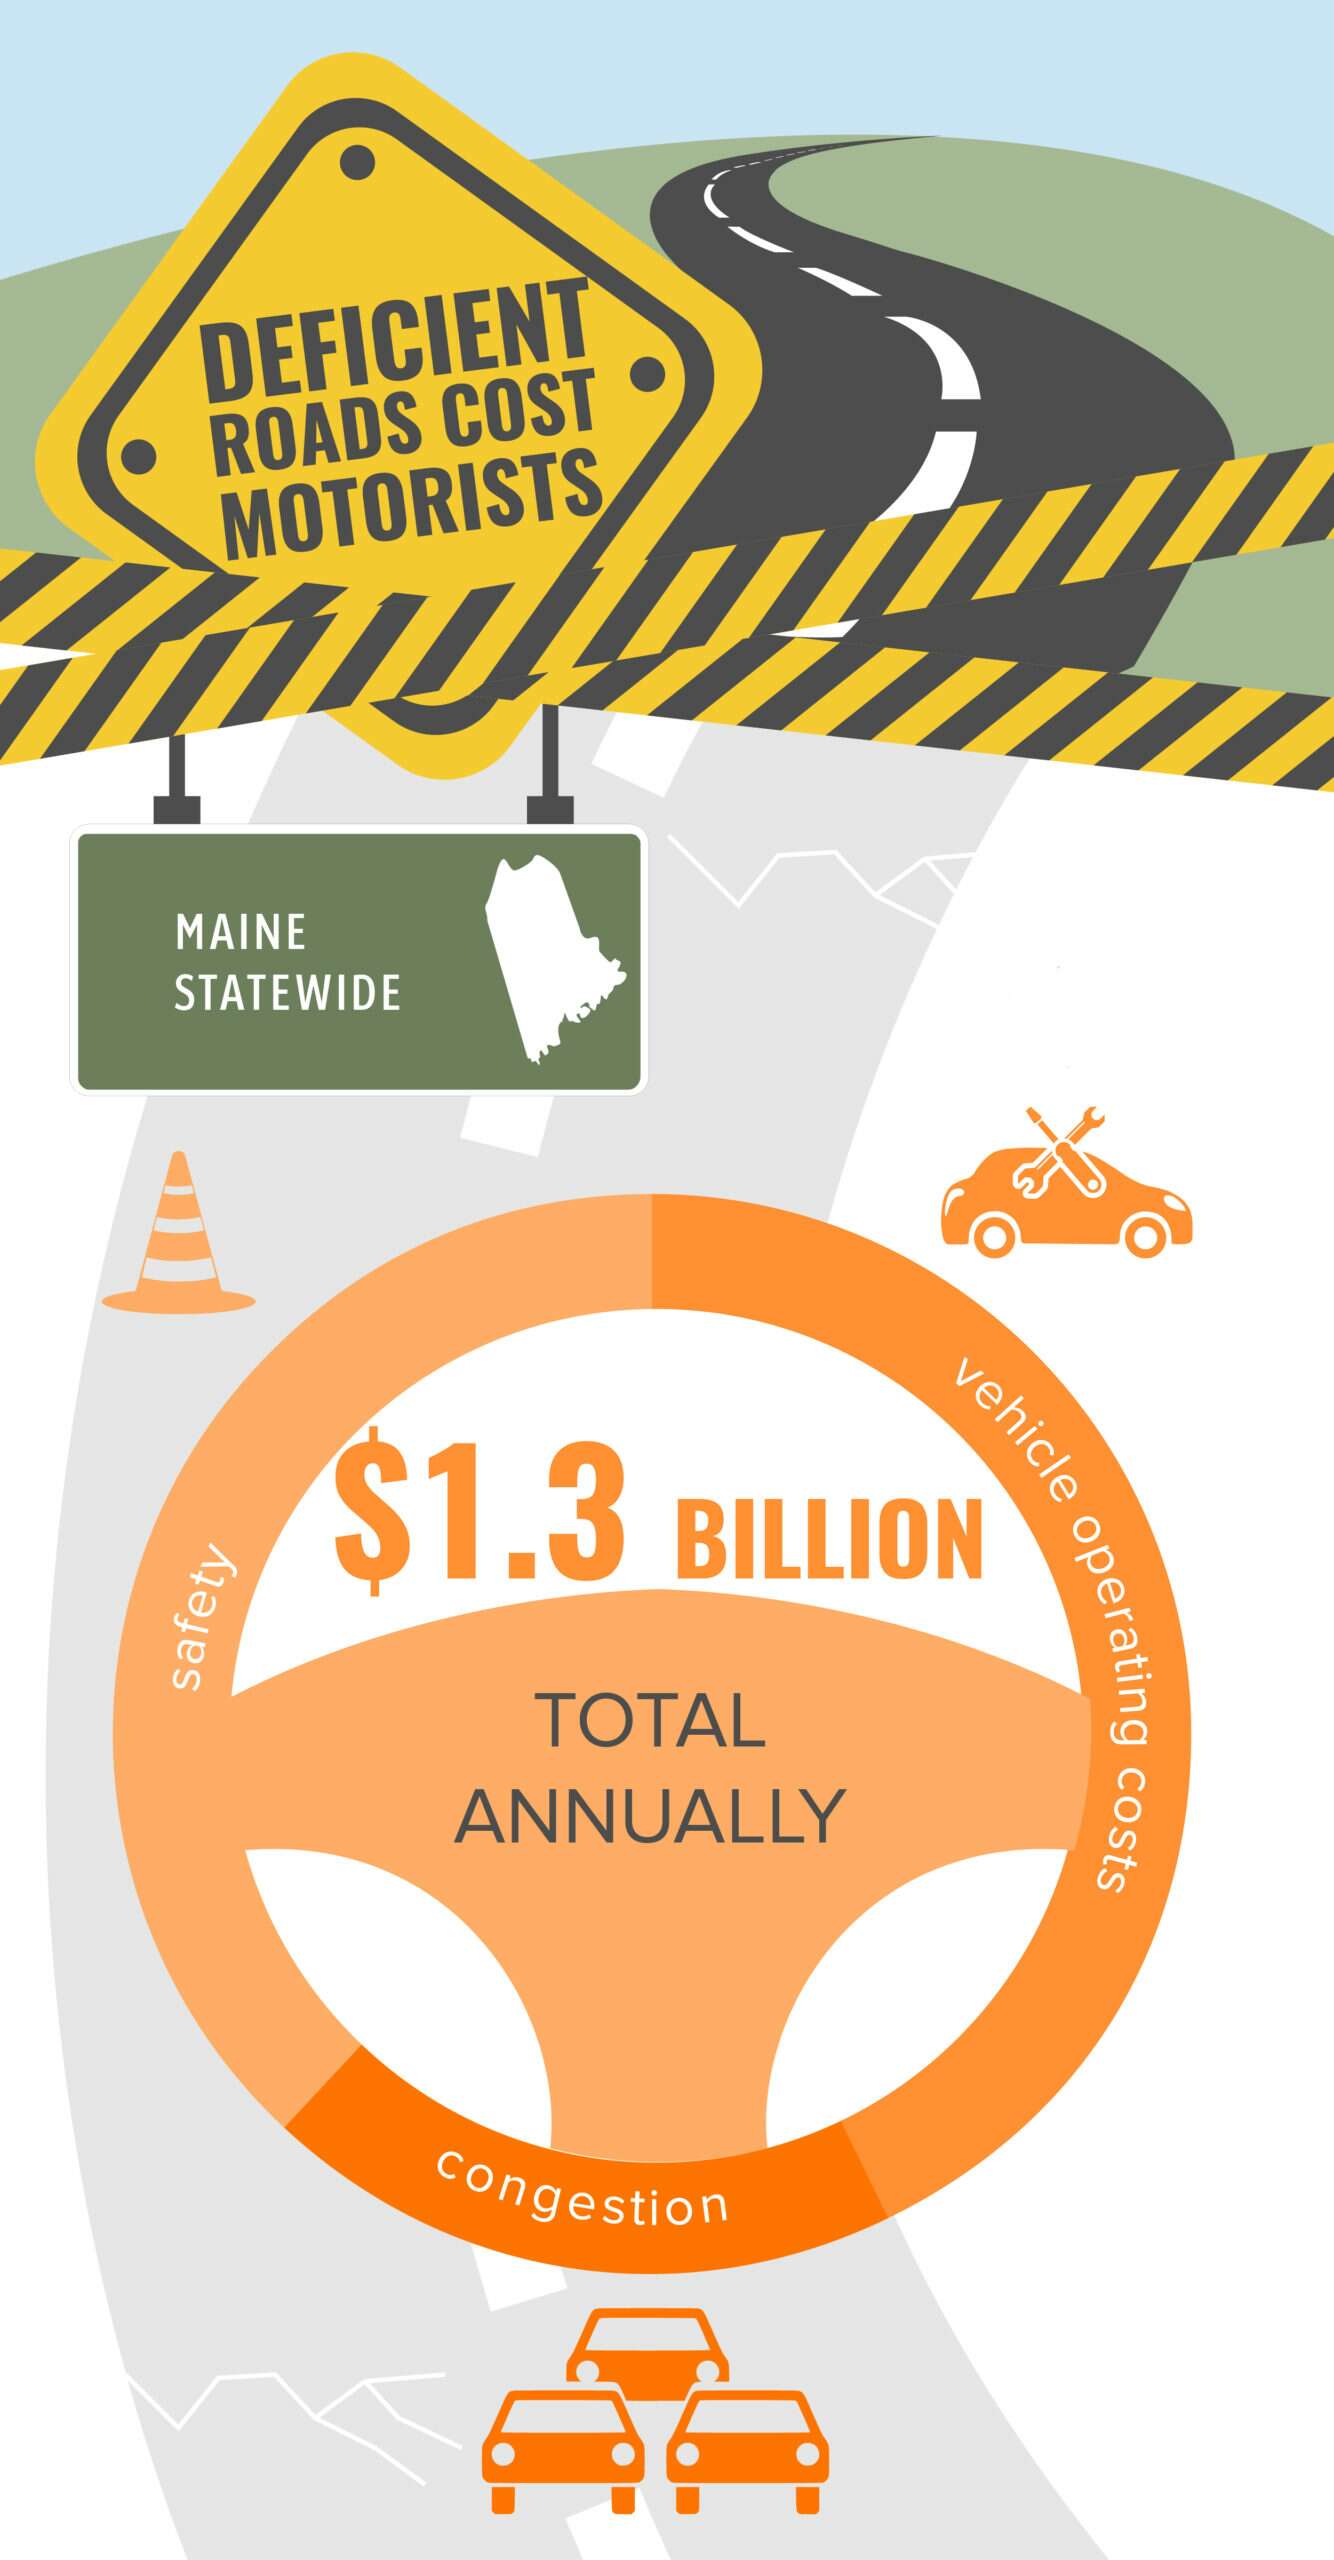 Infographic showing price motorists pay for poor roads in Maine